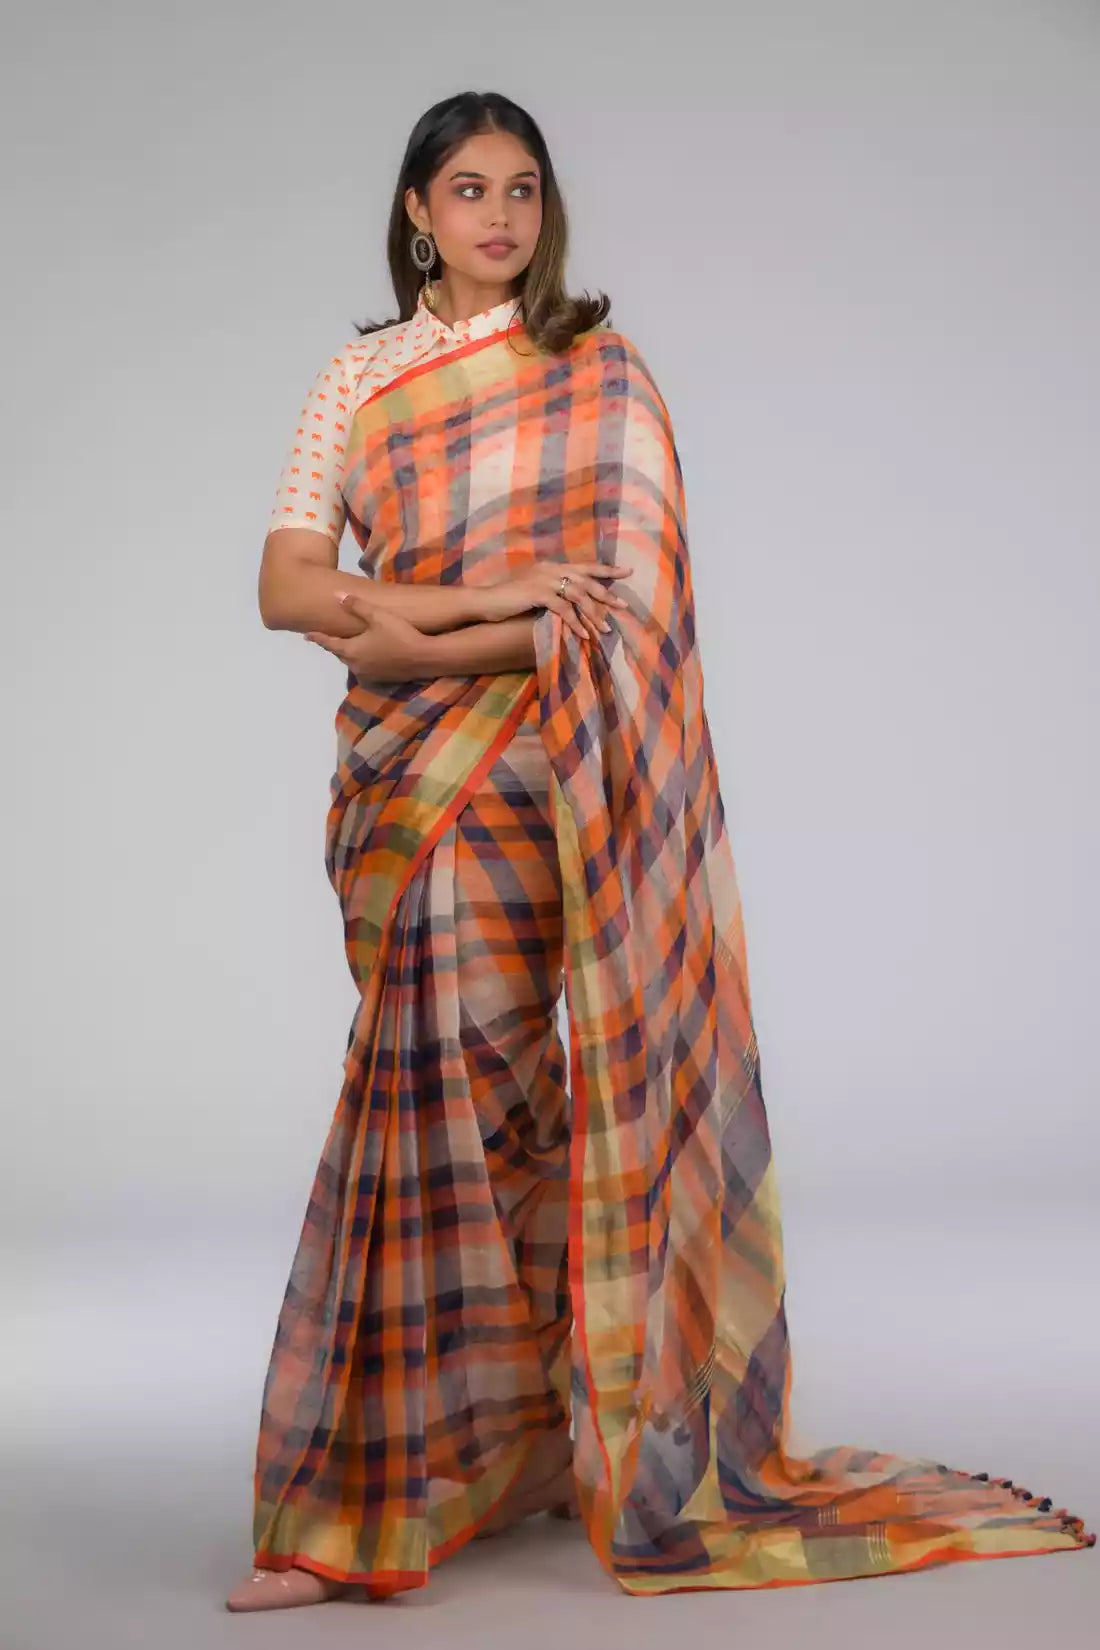 A lady in Linen By Linen Rustic Saree in Beige Checks, womens workwear standing against a grey background looking sideways